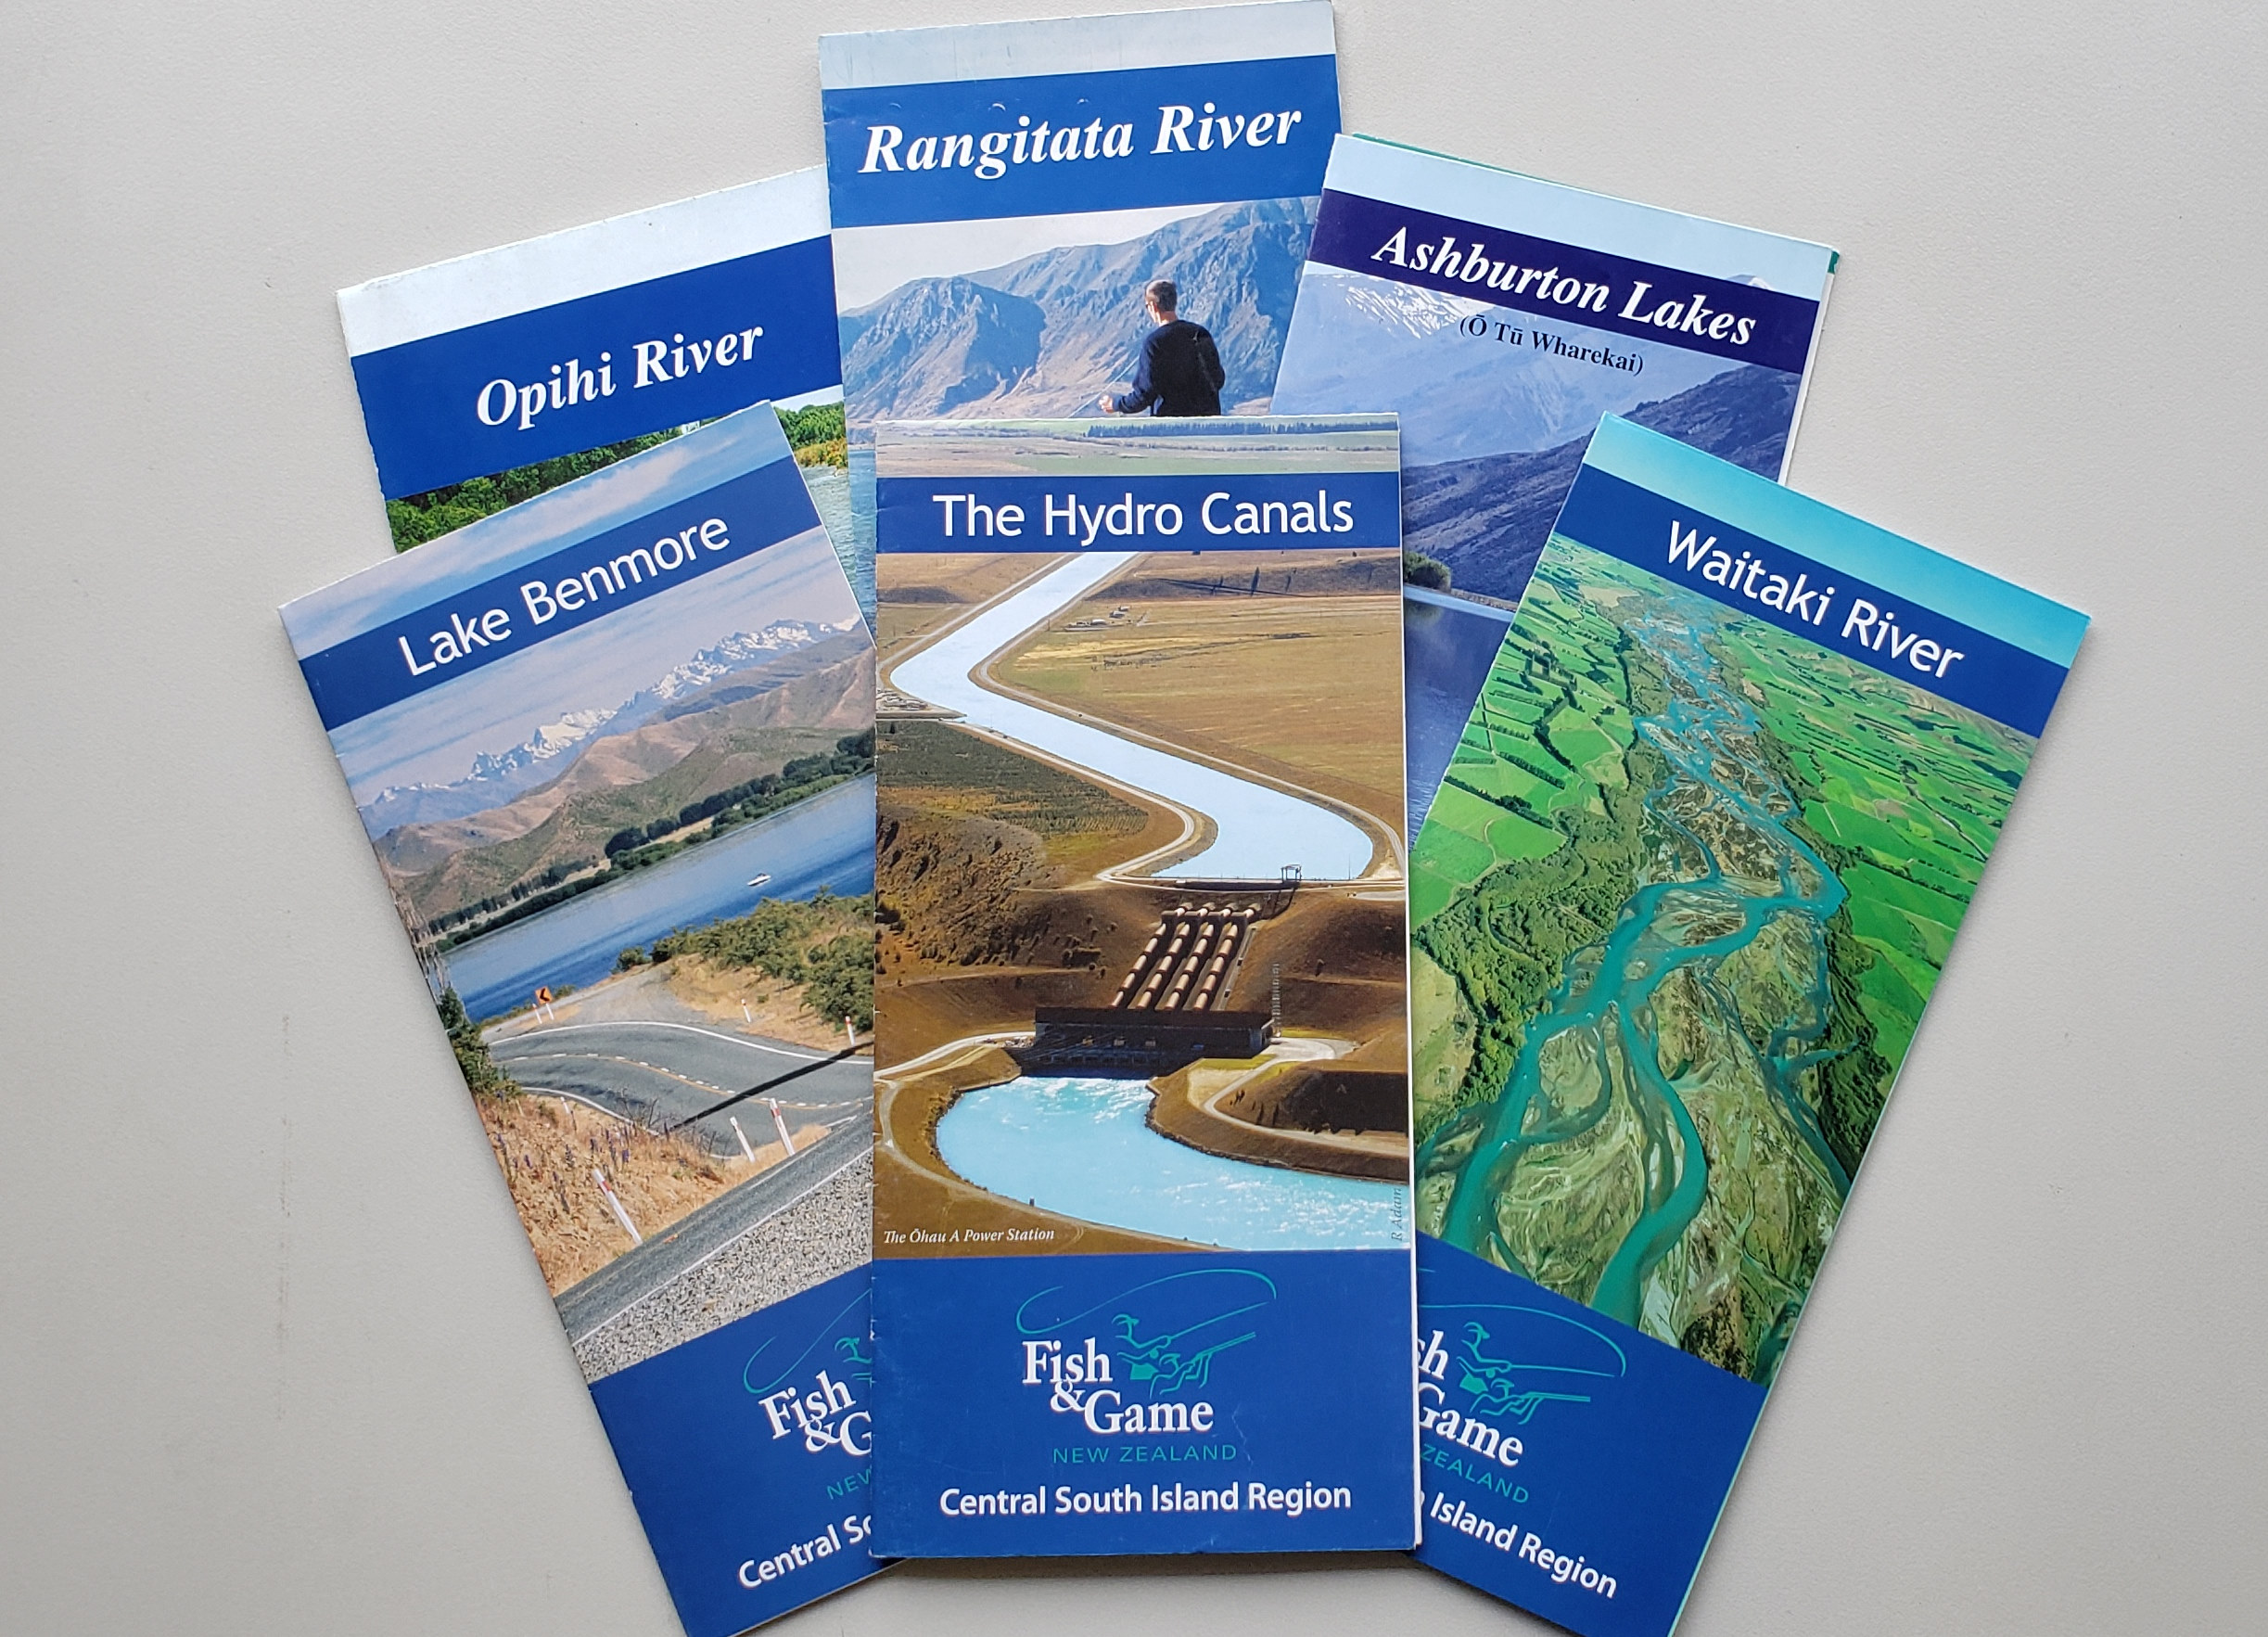 RL dec CSI 2 These CSI angler access guides can be found online5